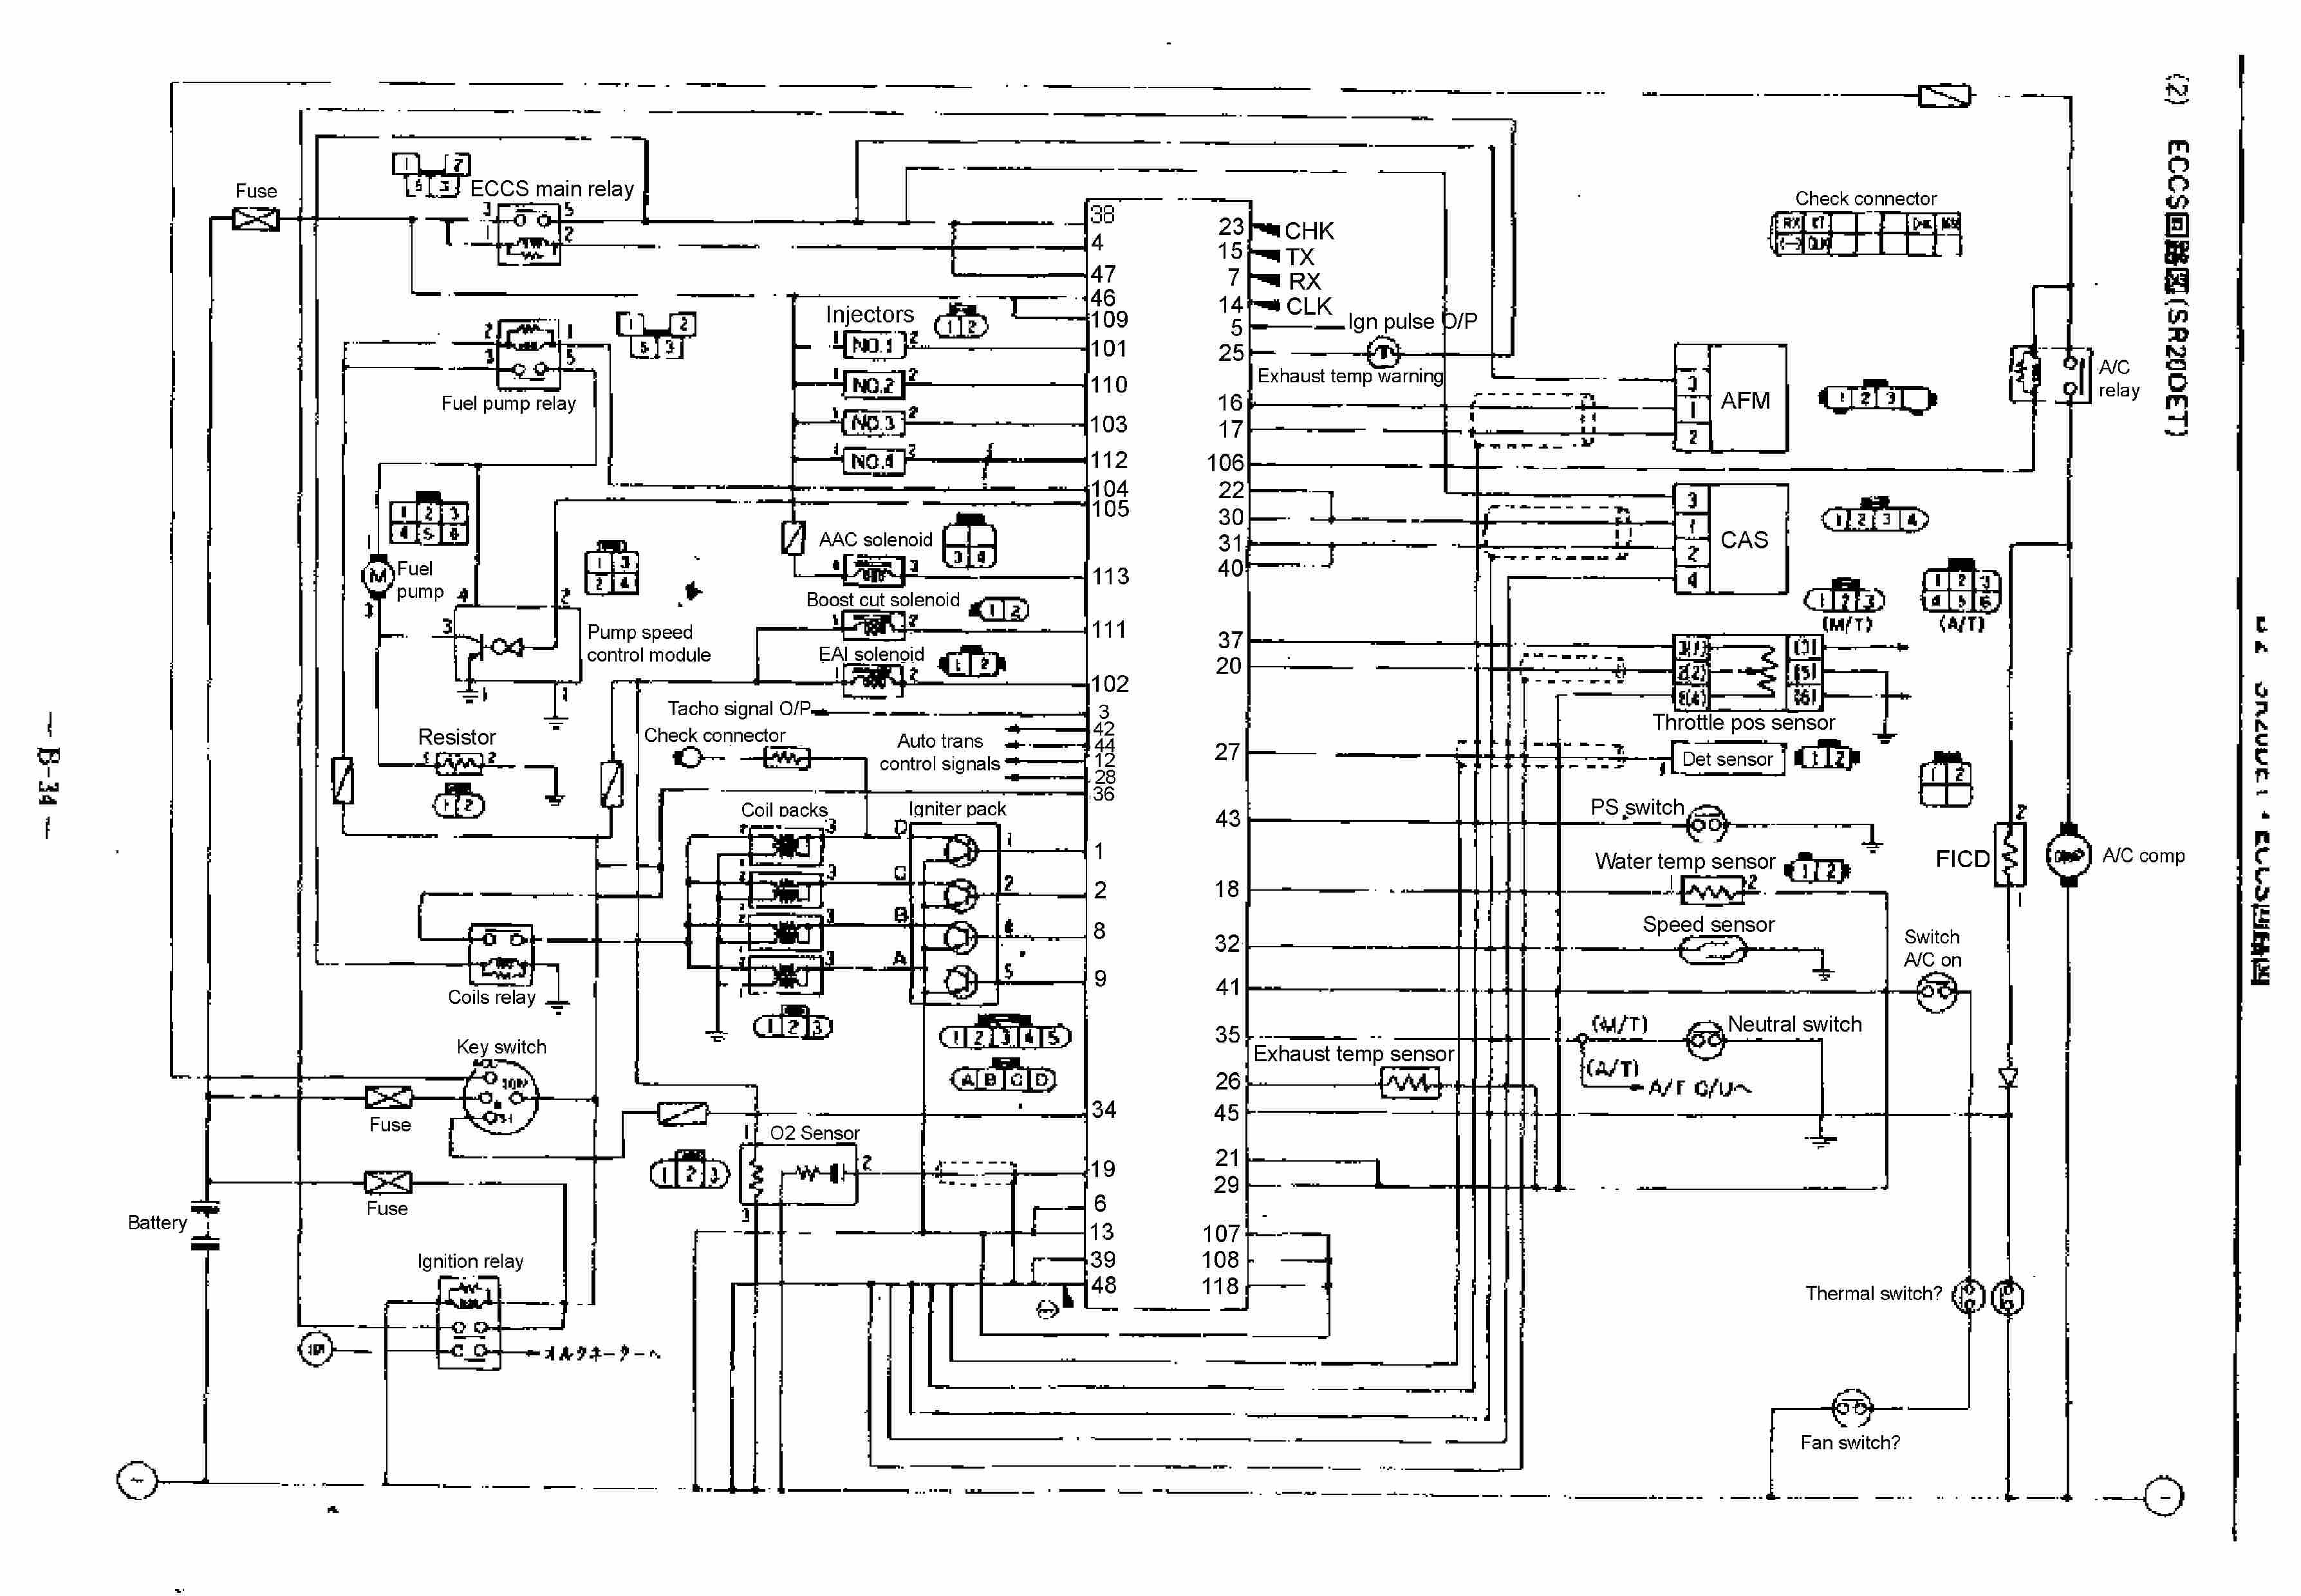 Nissan Ud Wiring Diagram from www.automotive-manuals.net